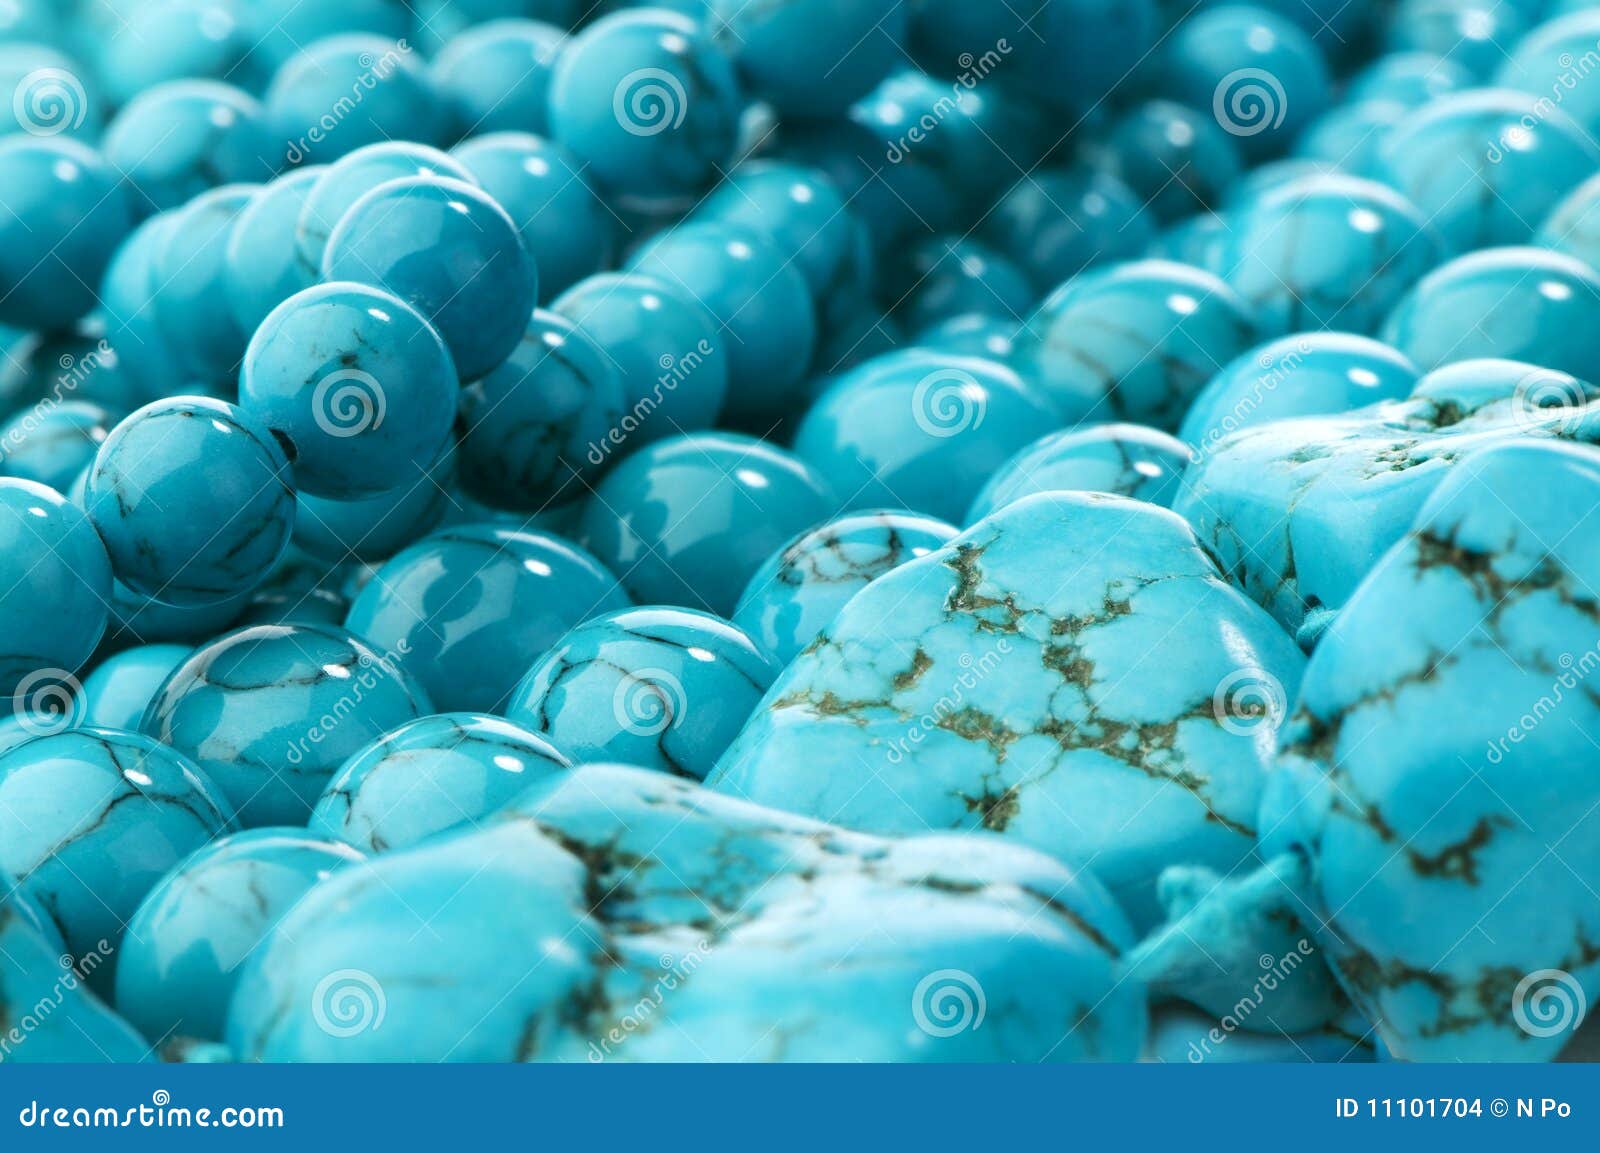 turquoise beads and stones close-up